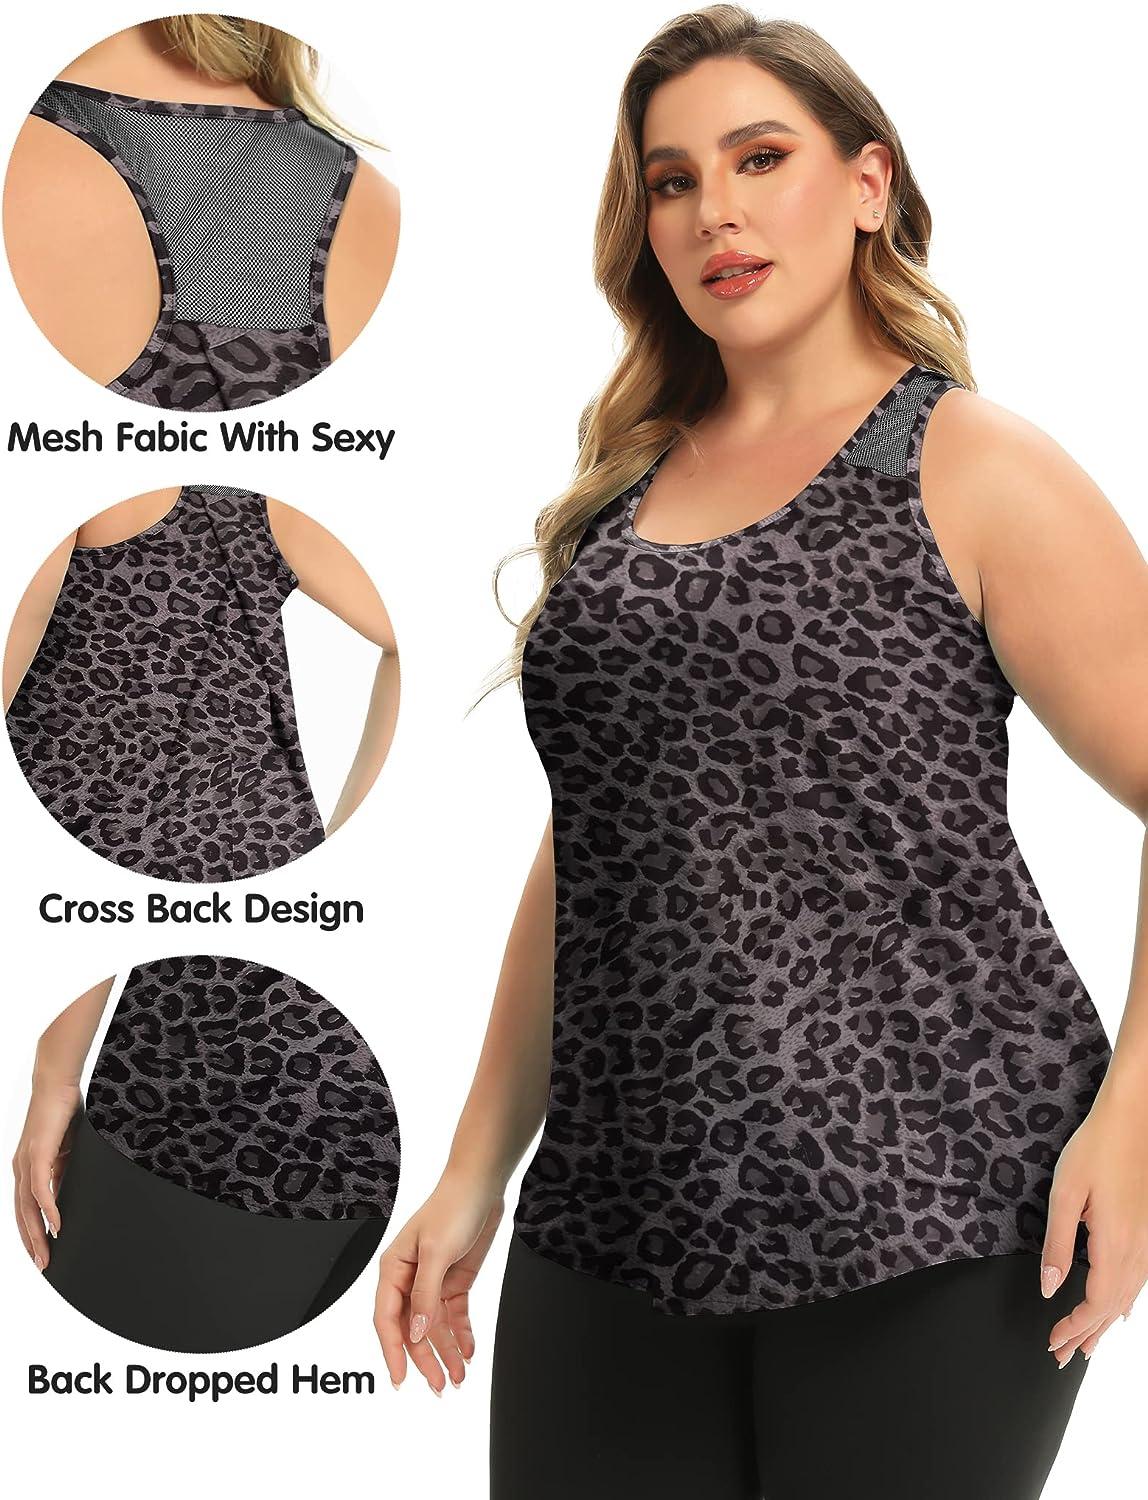 Women's Plus Size Workout Tank Tops Racerback Loose Fit Sport Athletic Tops  Yoga Running Summer Shirts Bb_grey Leopard 3X-Large Plus